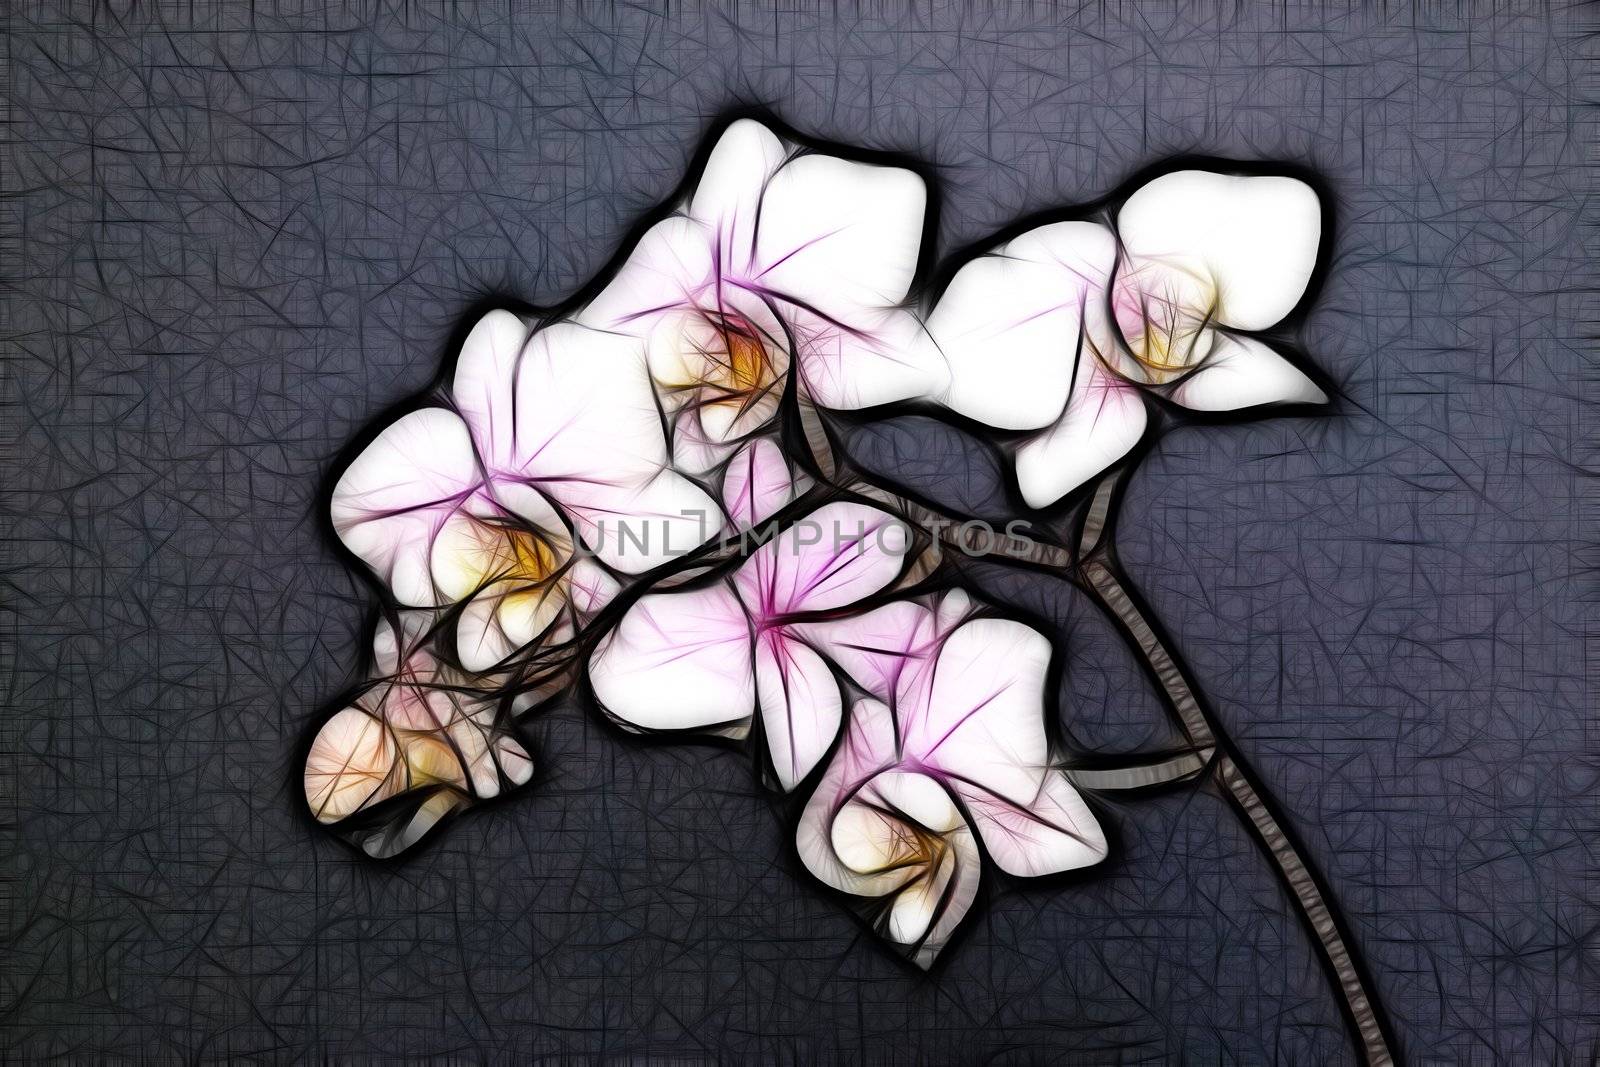 An artistic impression of a minature orchid spray.